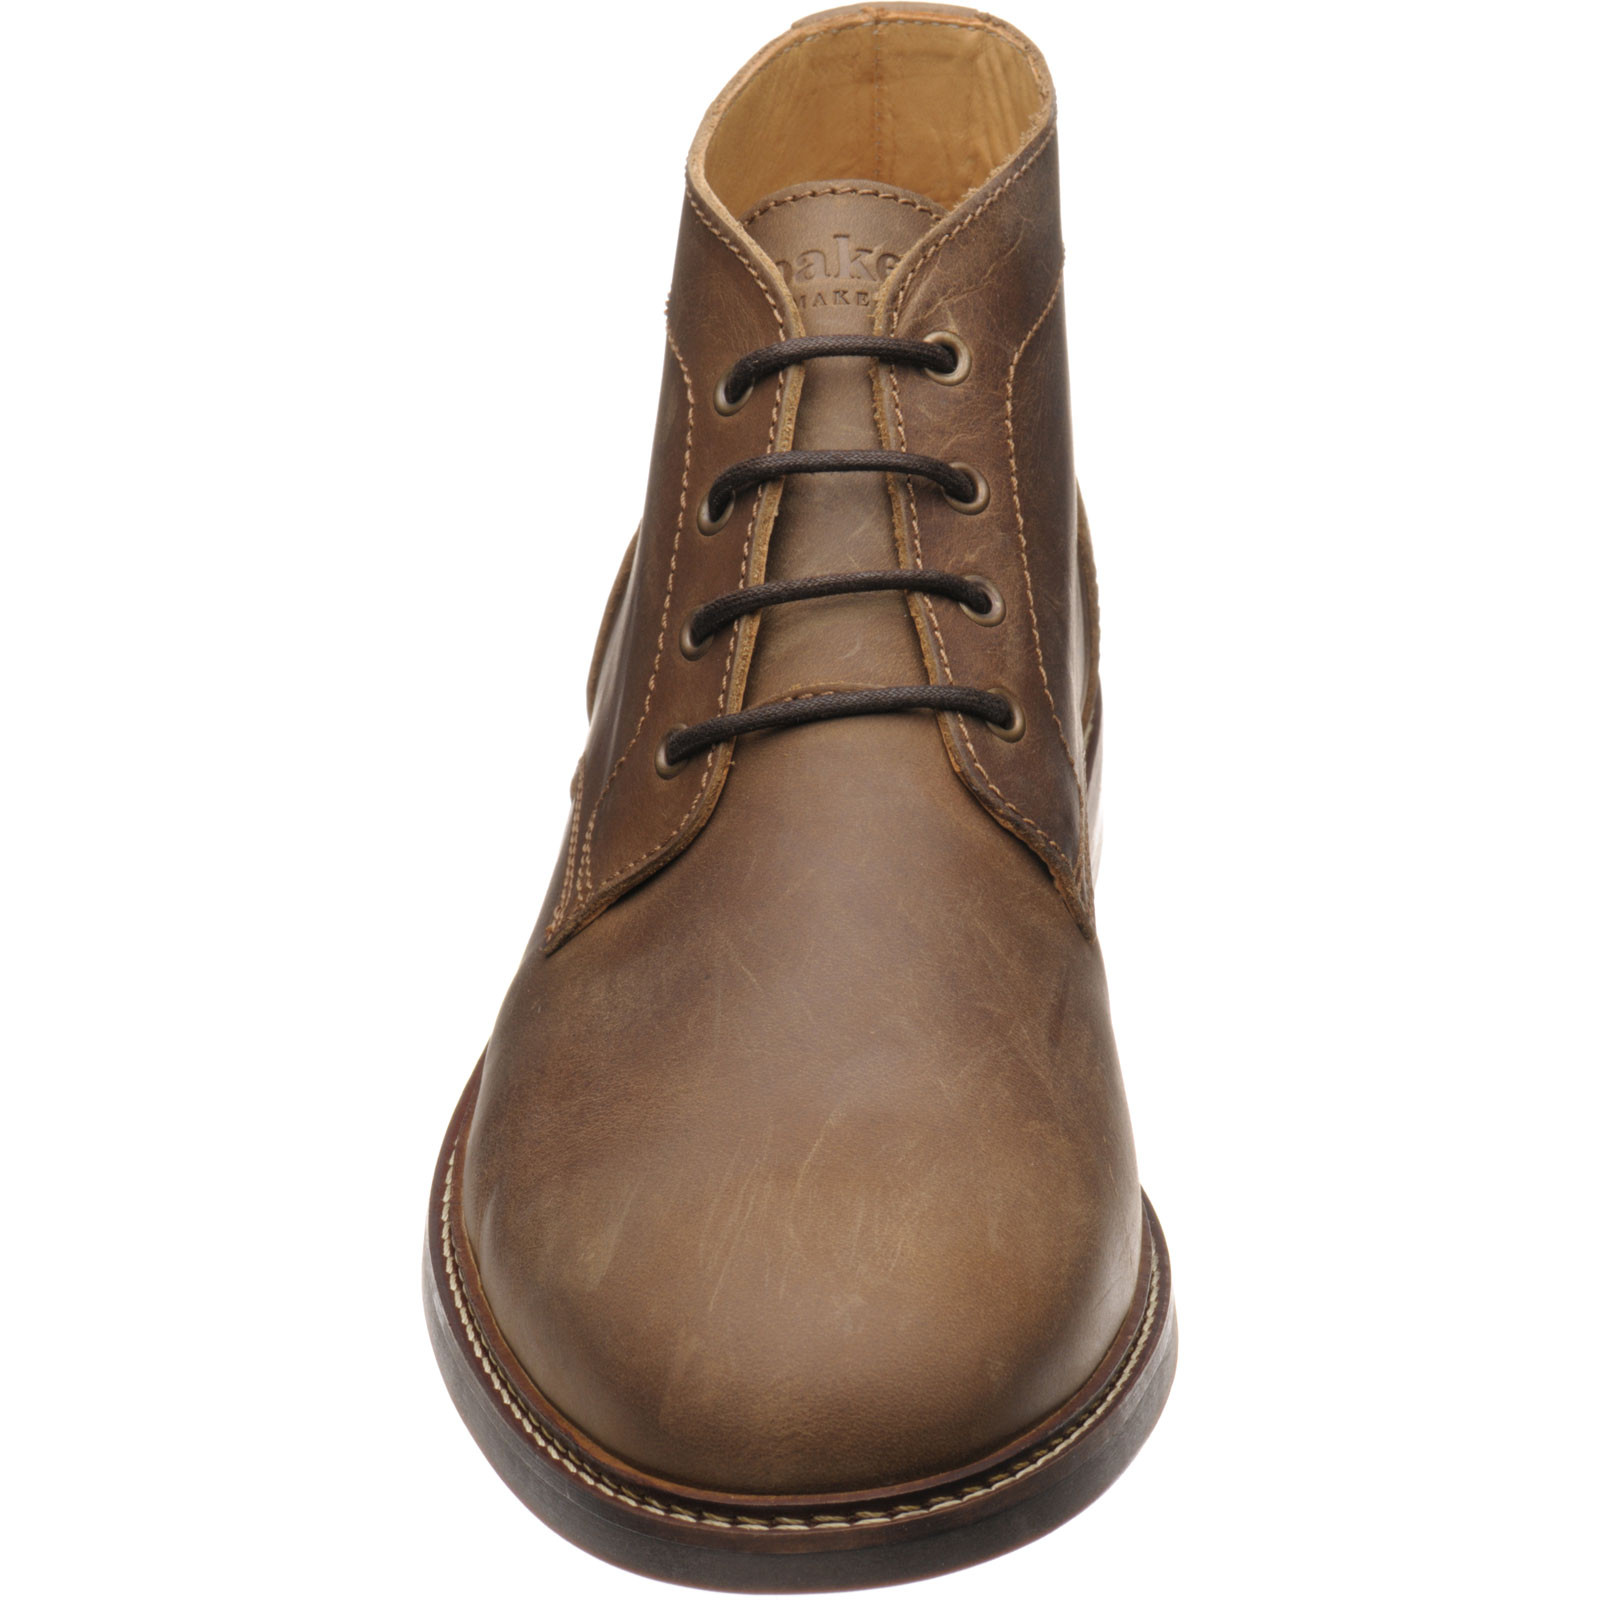 Loake shoes | Loake Lifestyle | Gilbert in Brown Oiled Nubuck at ...